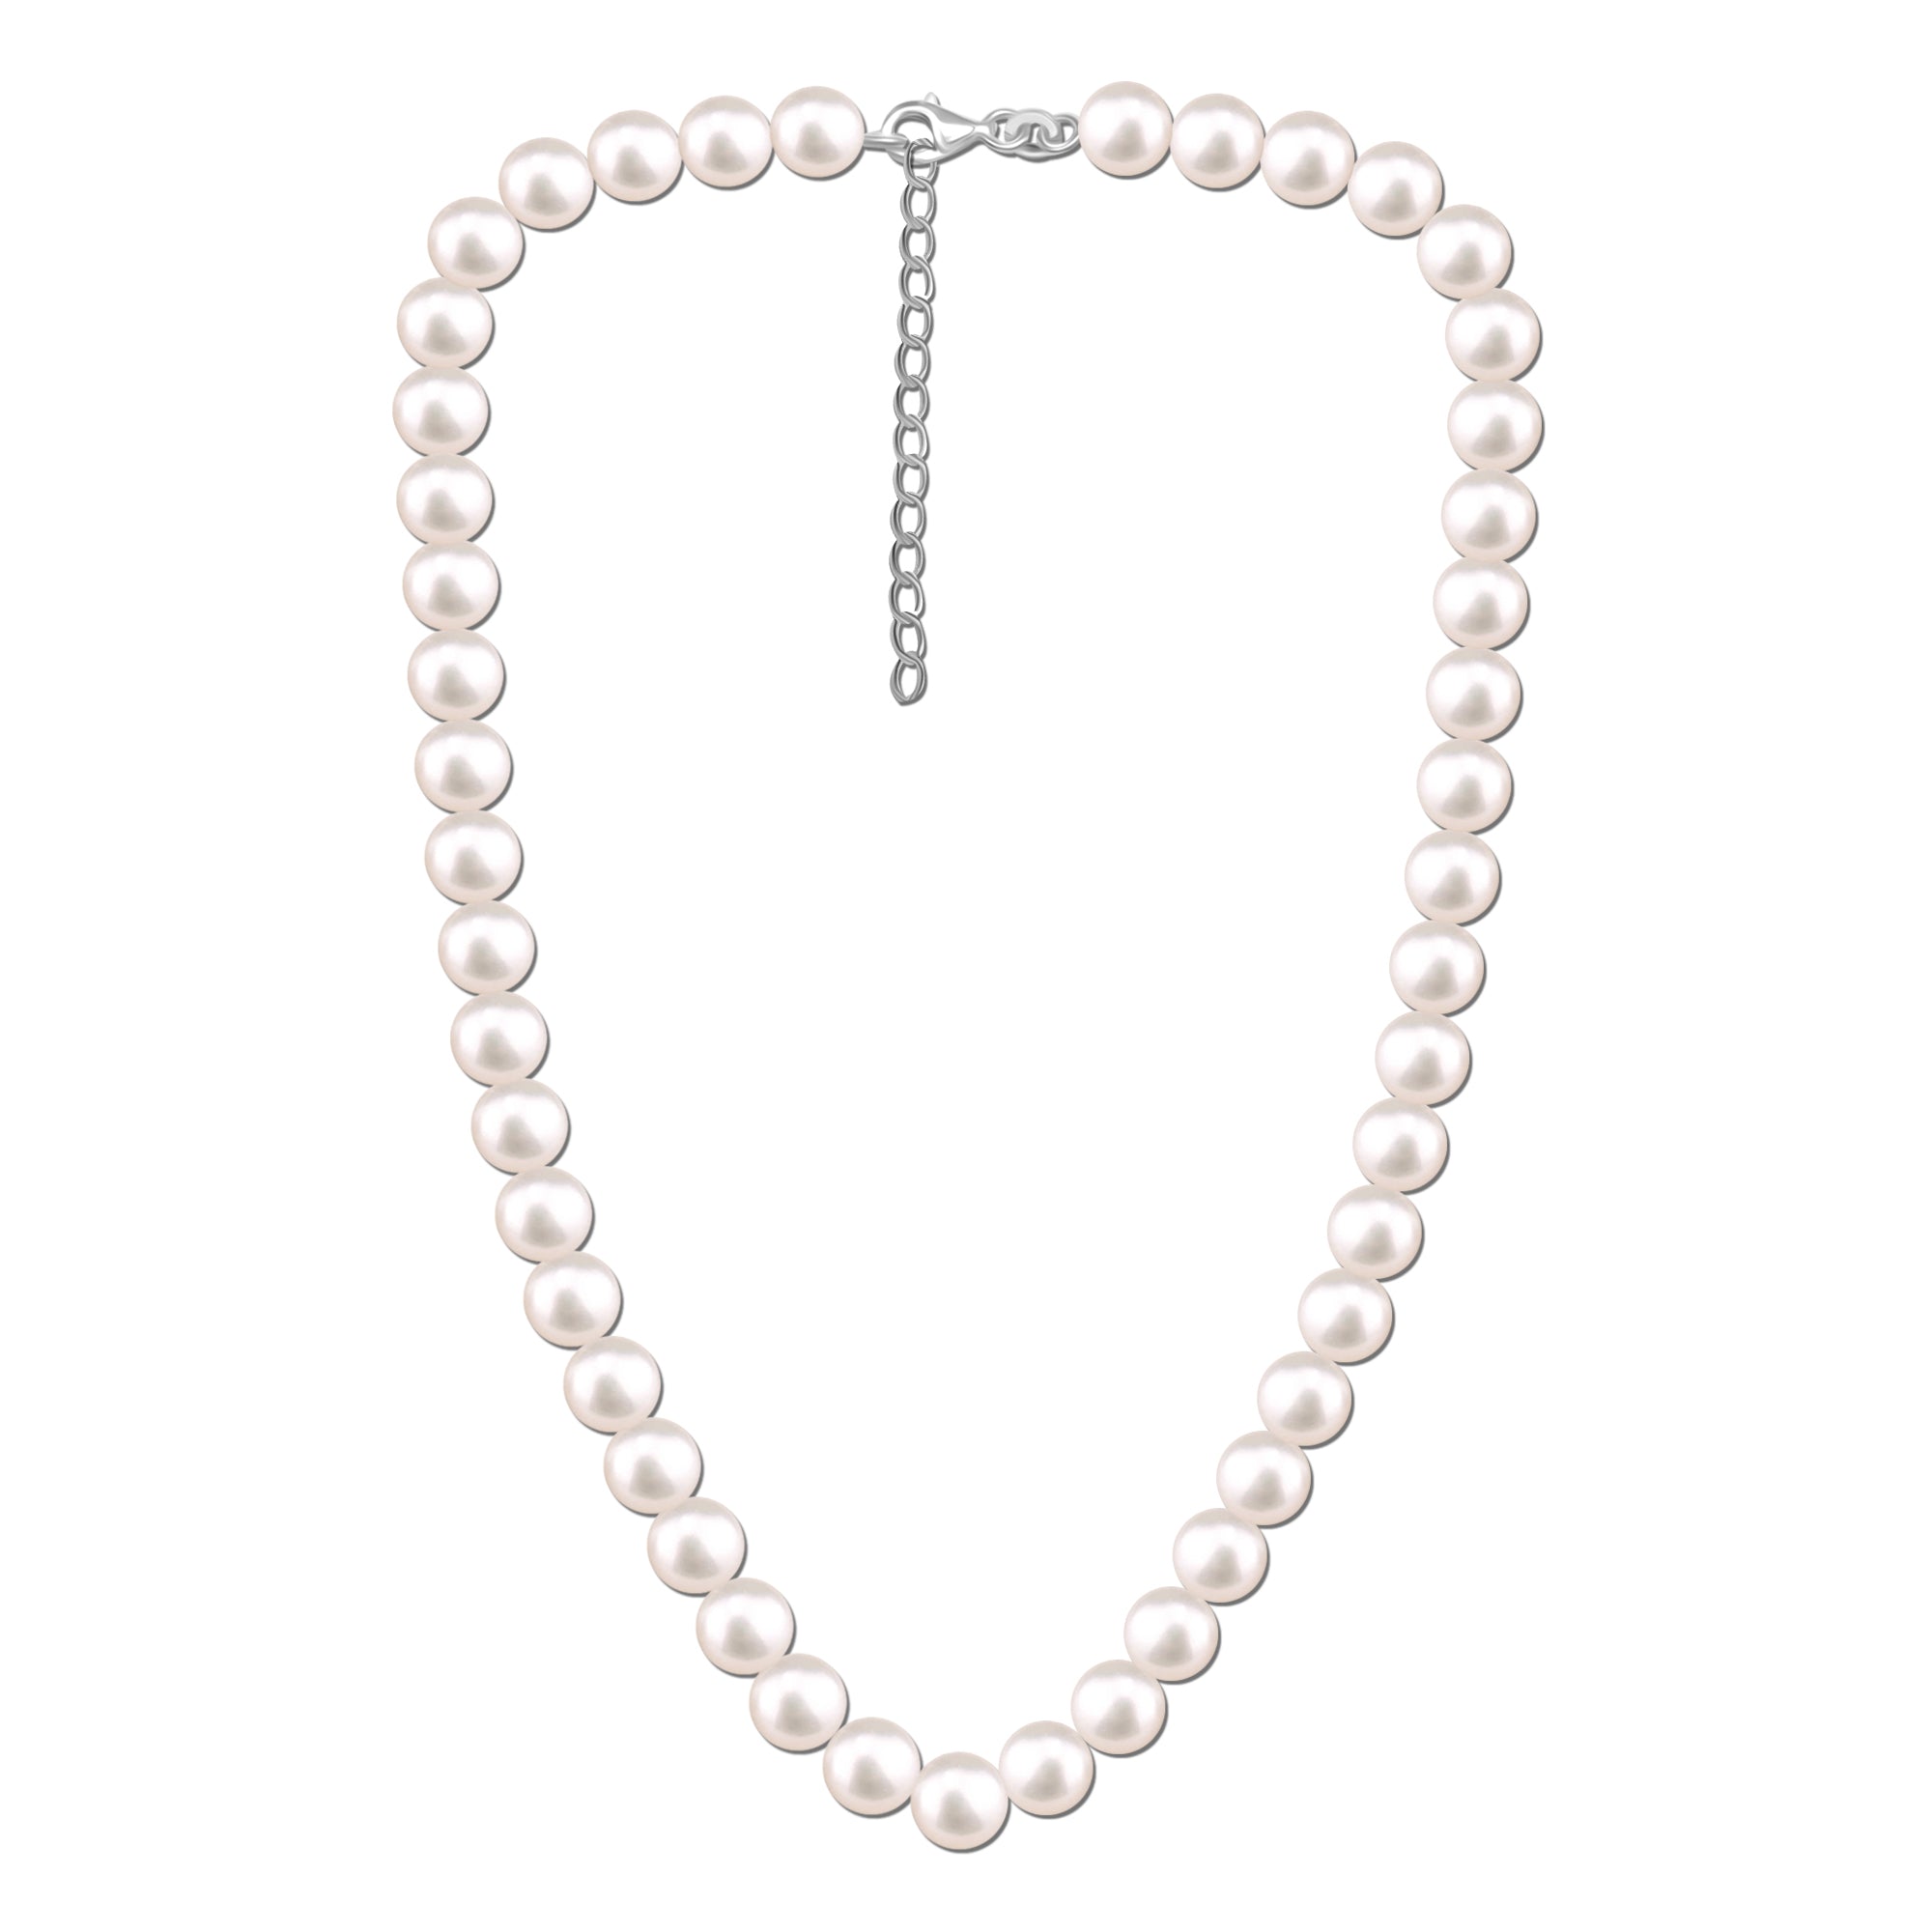 925 Sterling Silver Pearl Necklace for Women 18 Inches With Chain